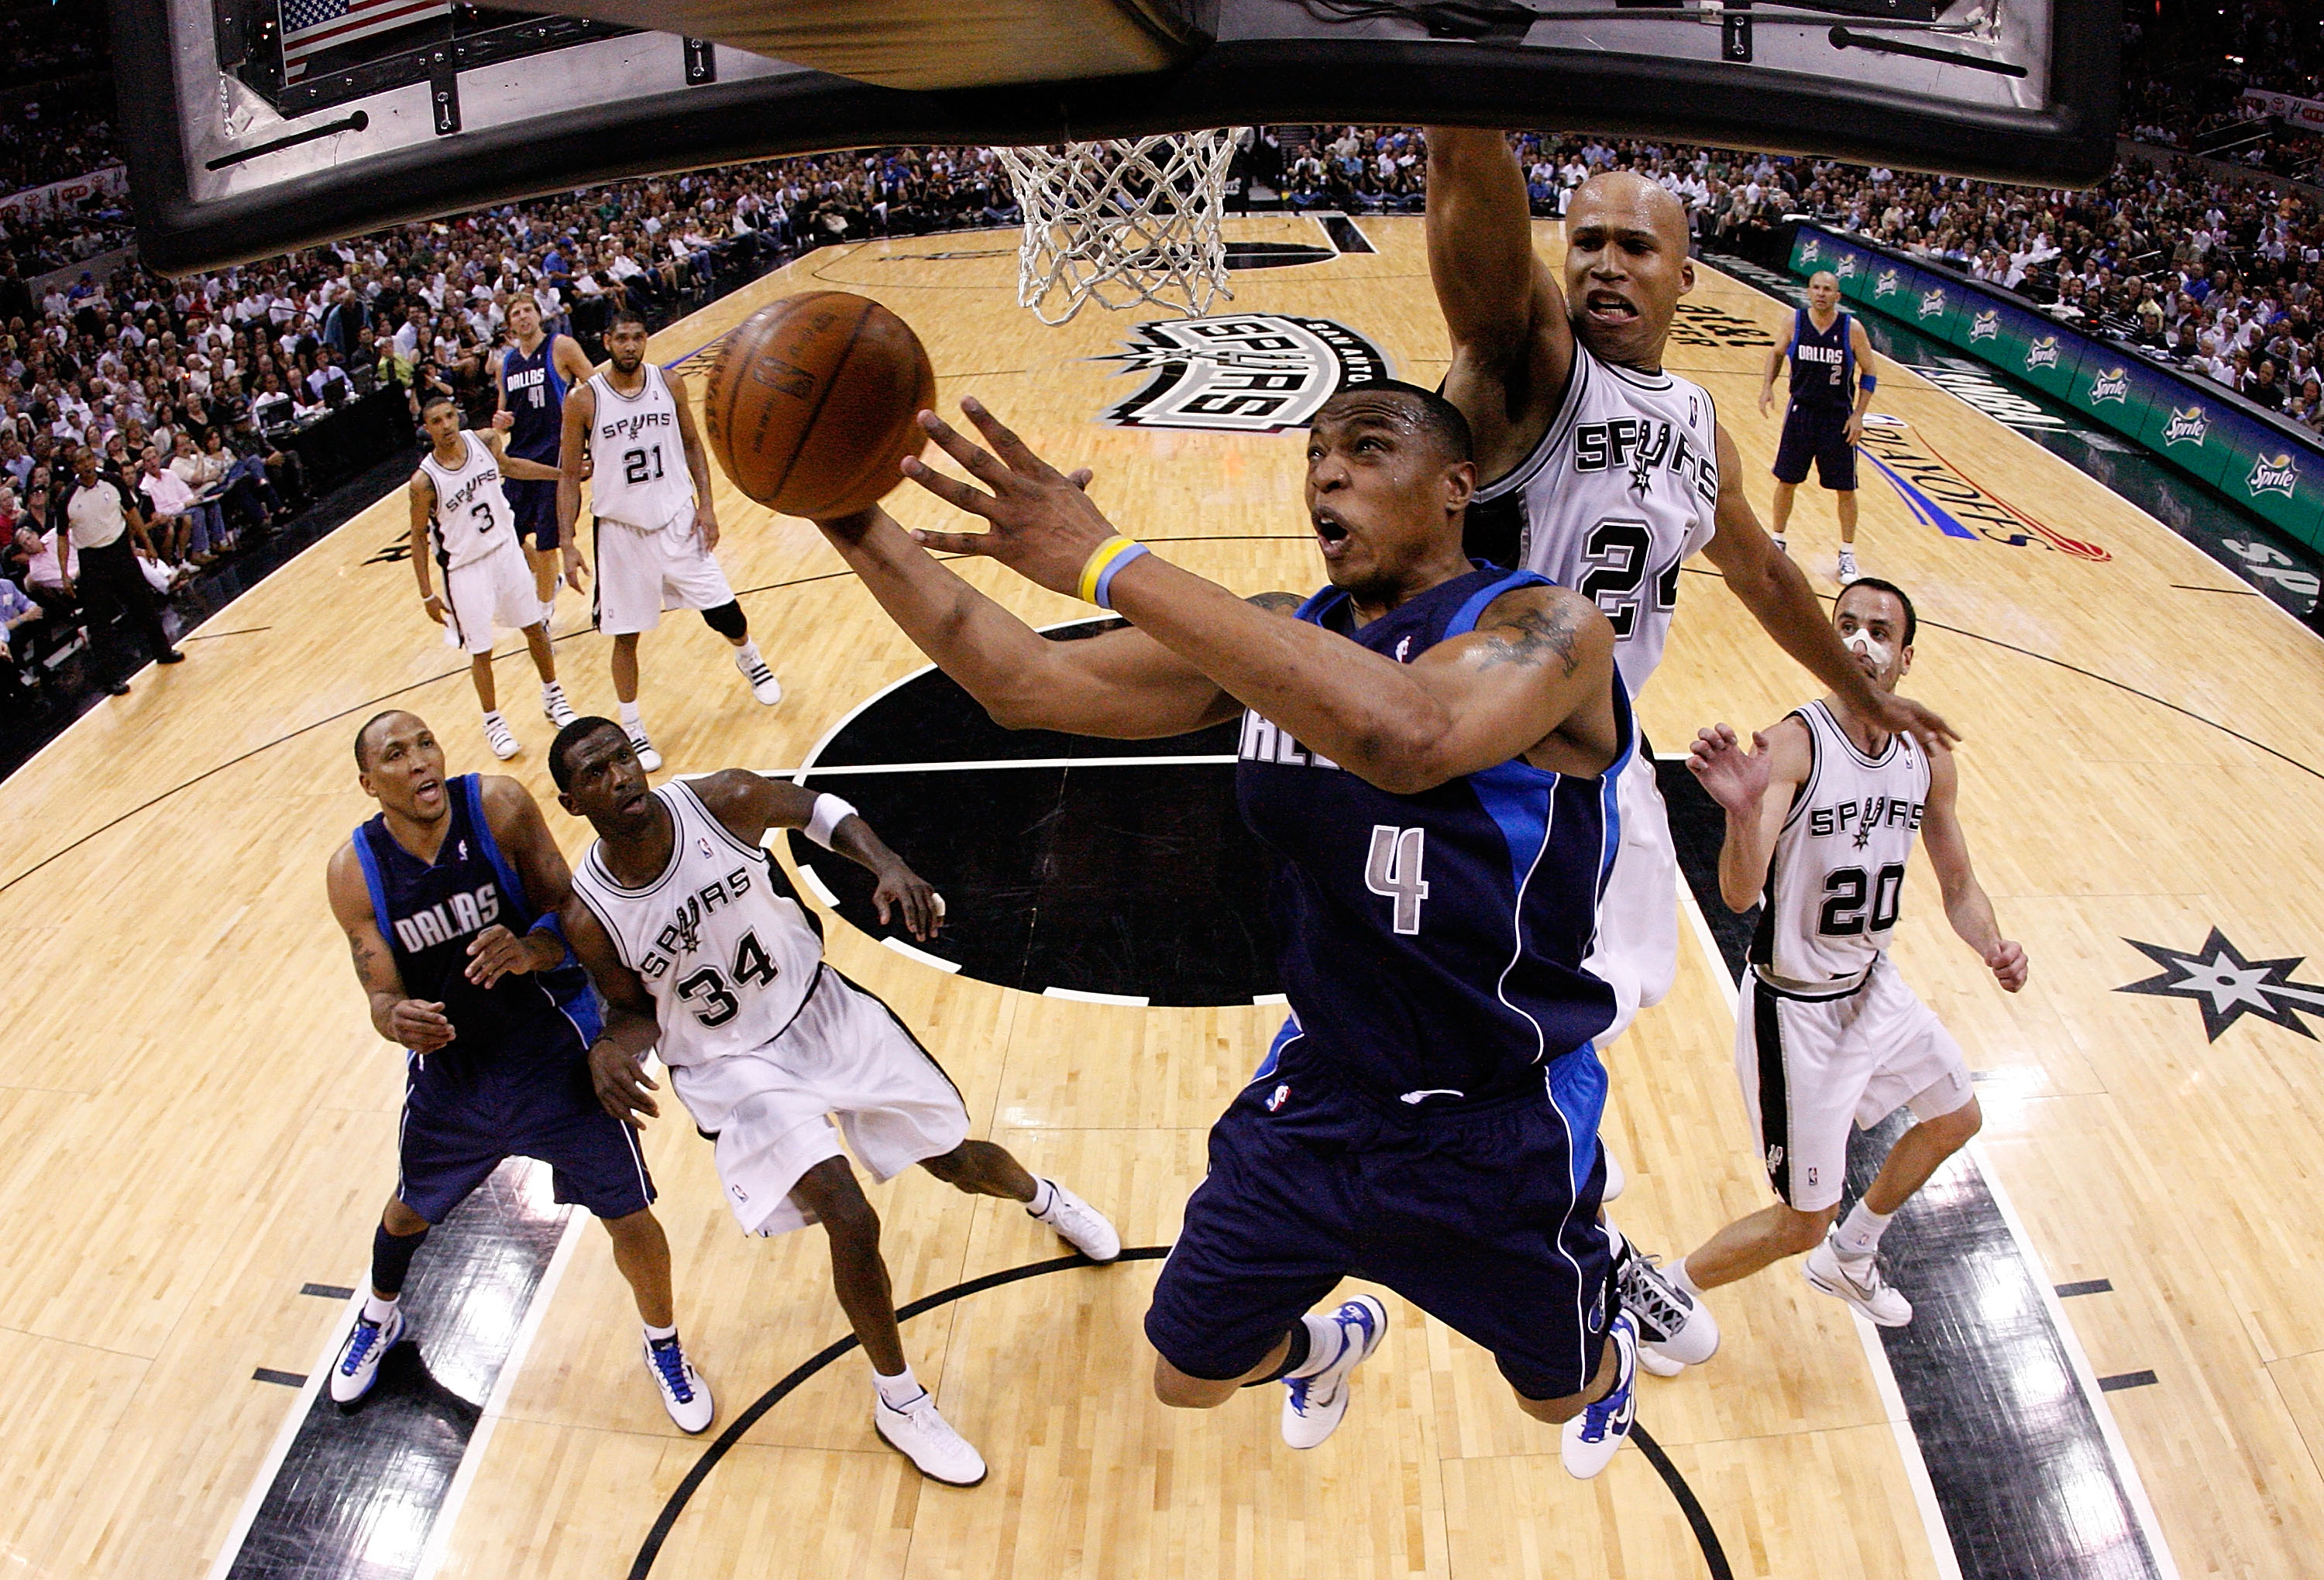 SAN ANTONIO - APRIL 29:  Forward Caron Butler #4 of the Dallas Mavericks takes a shot against Richard Jefferson #24 of the San Antonio Spurs in Game Six of the Western Conference Quarterfinals during the 2010 NBA Playoffs at AT&T Center on April 29, 2010 